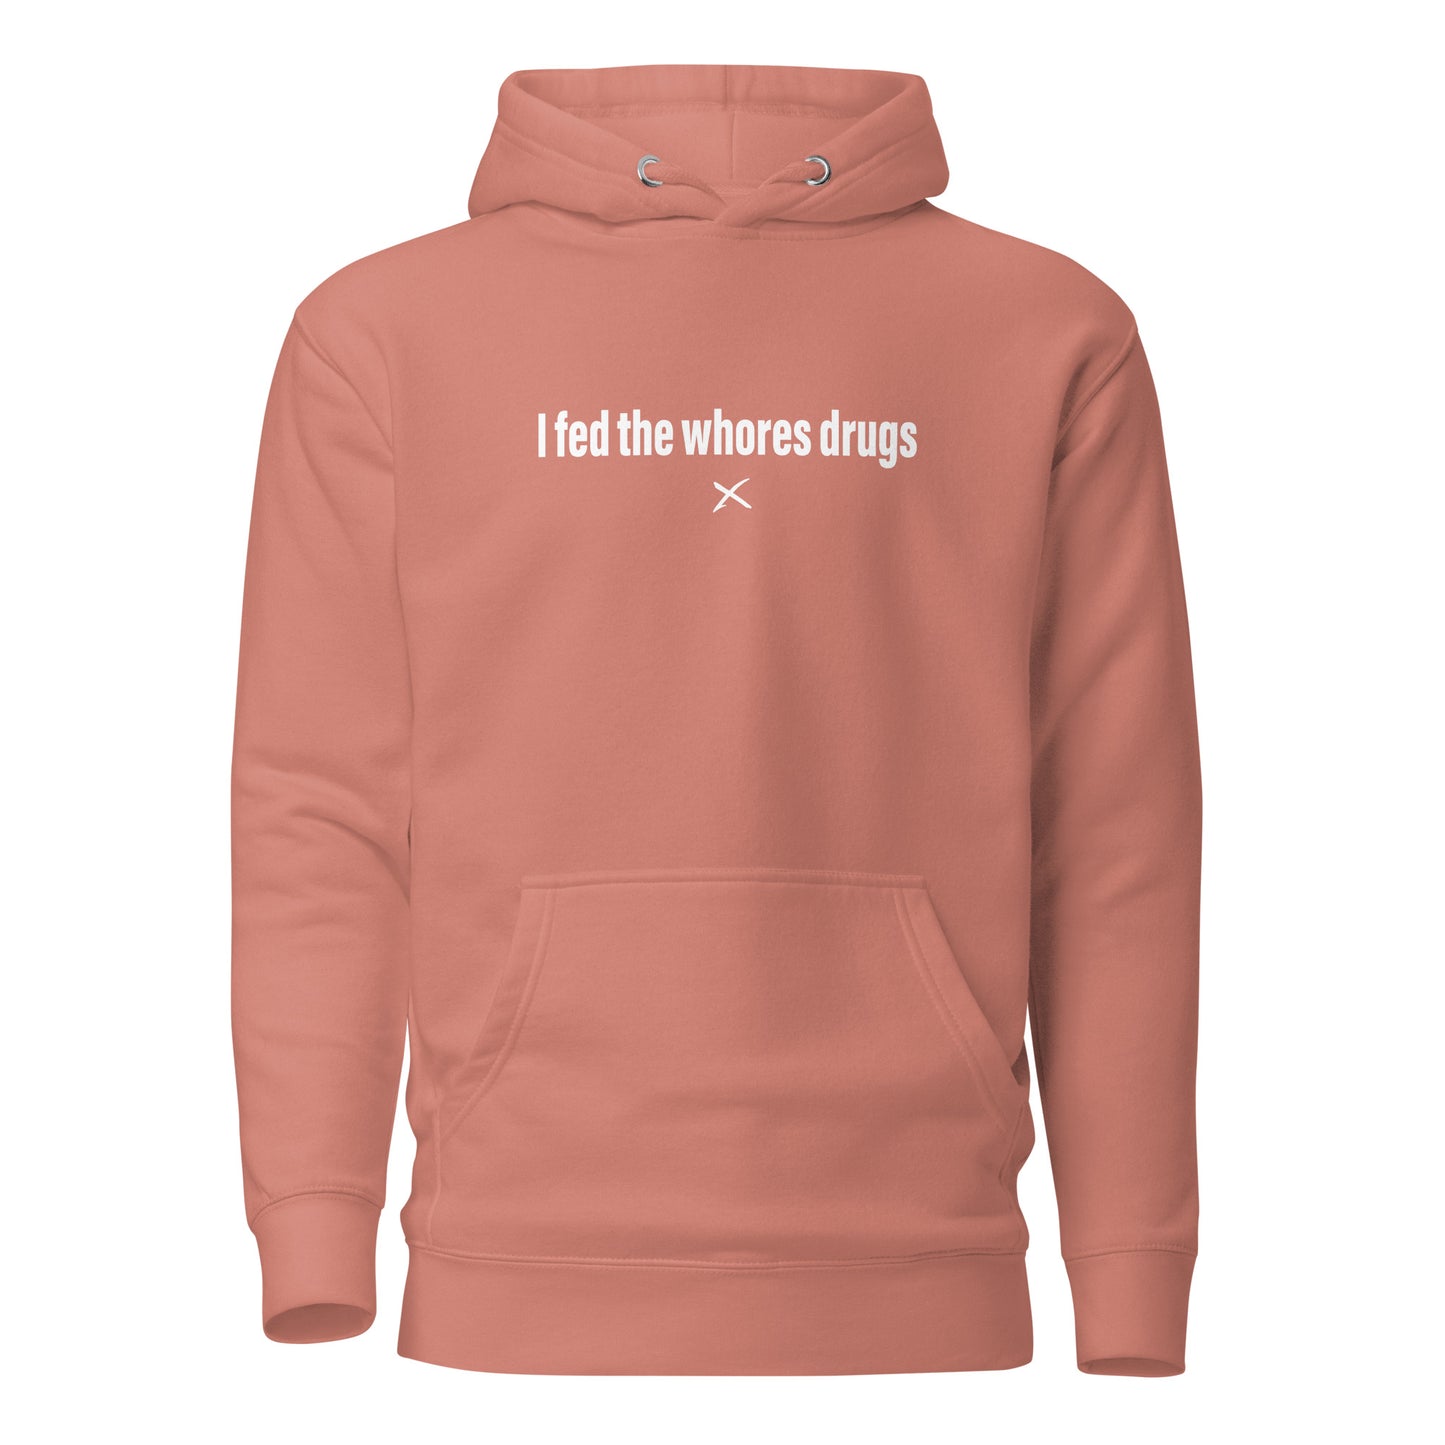 I fed the whores drugs - Hoodie